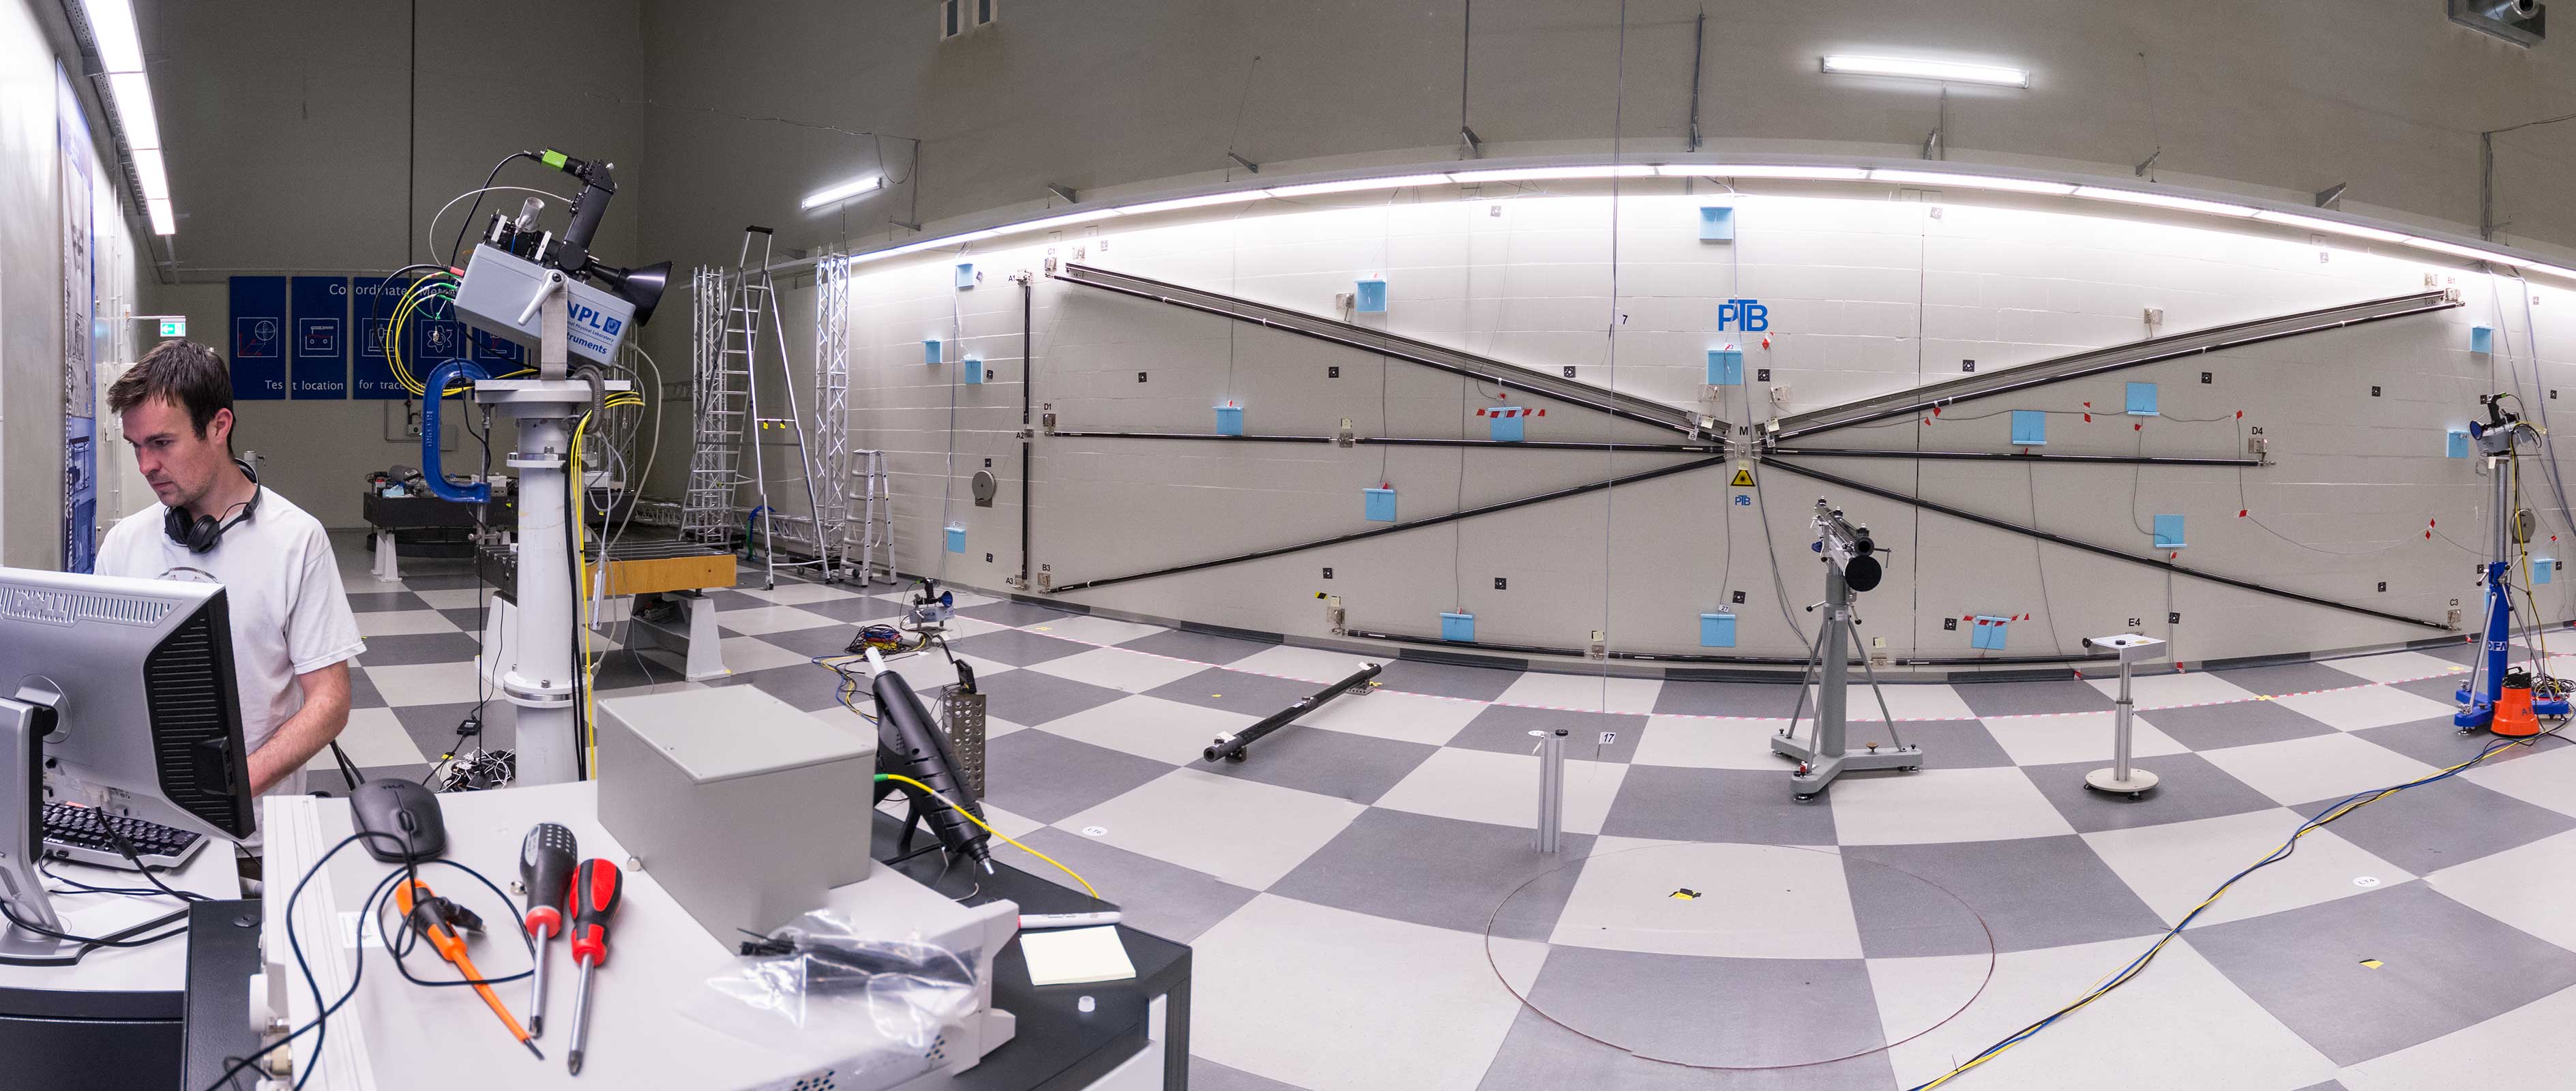 Photo of the Frequency Scanning Interferometry (FSI) system for large volume metrology in the lab at NPL